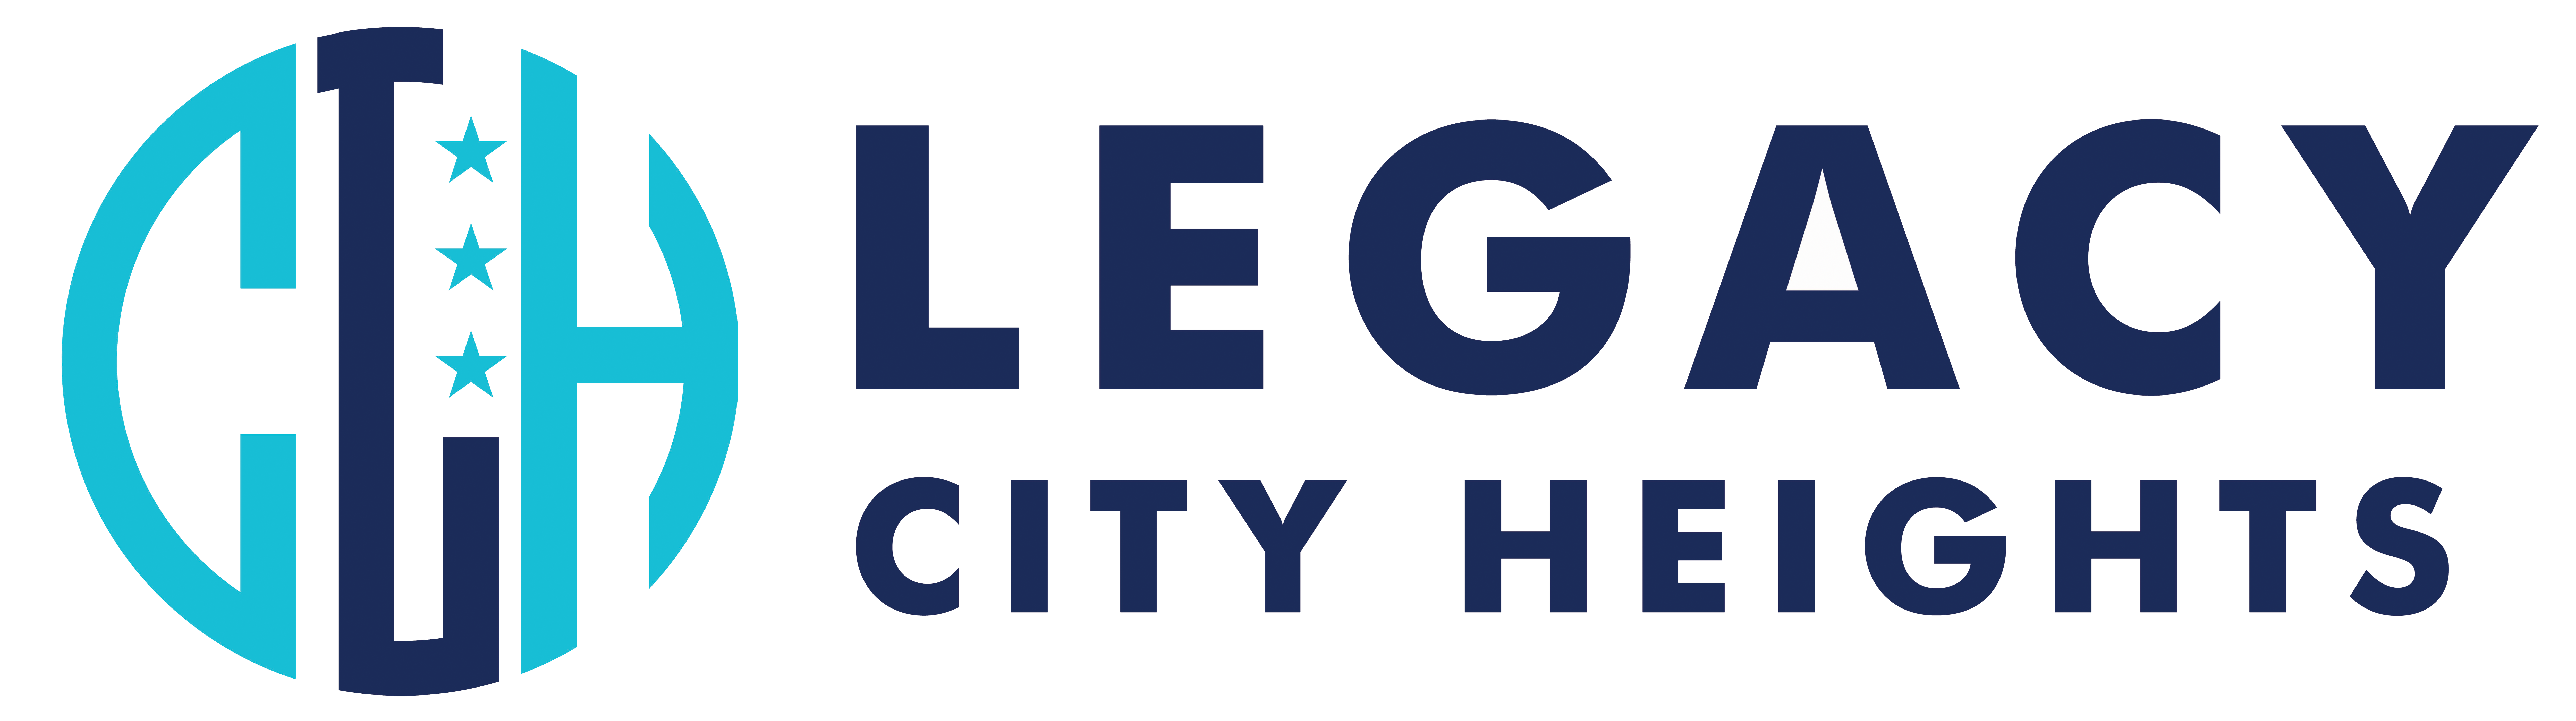 Legacy City Heights